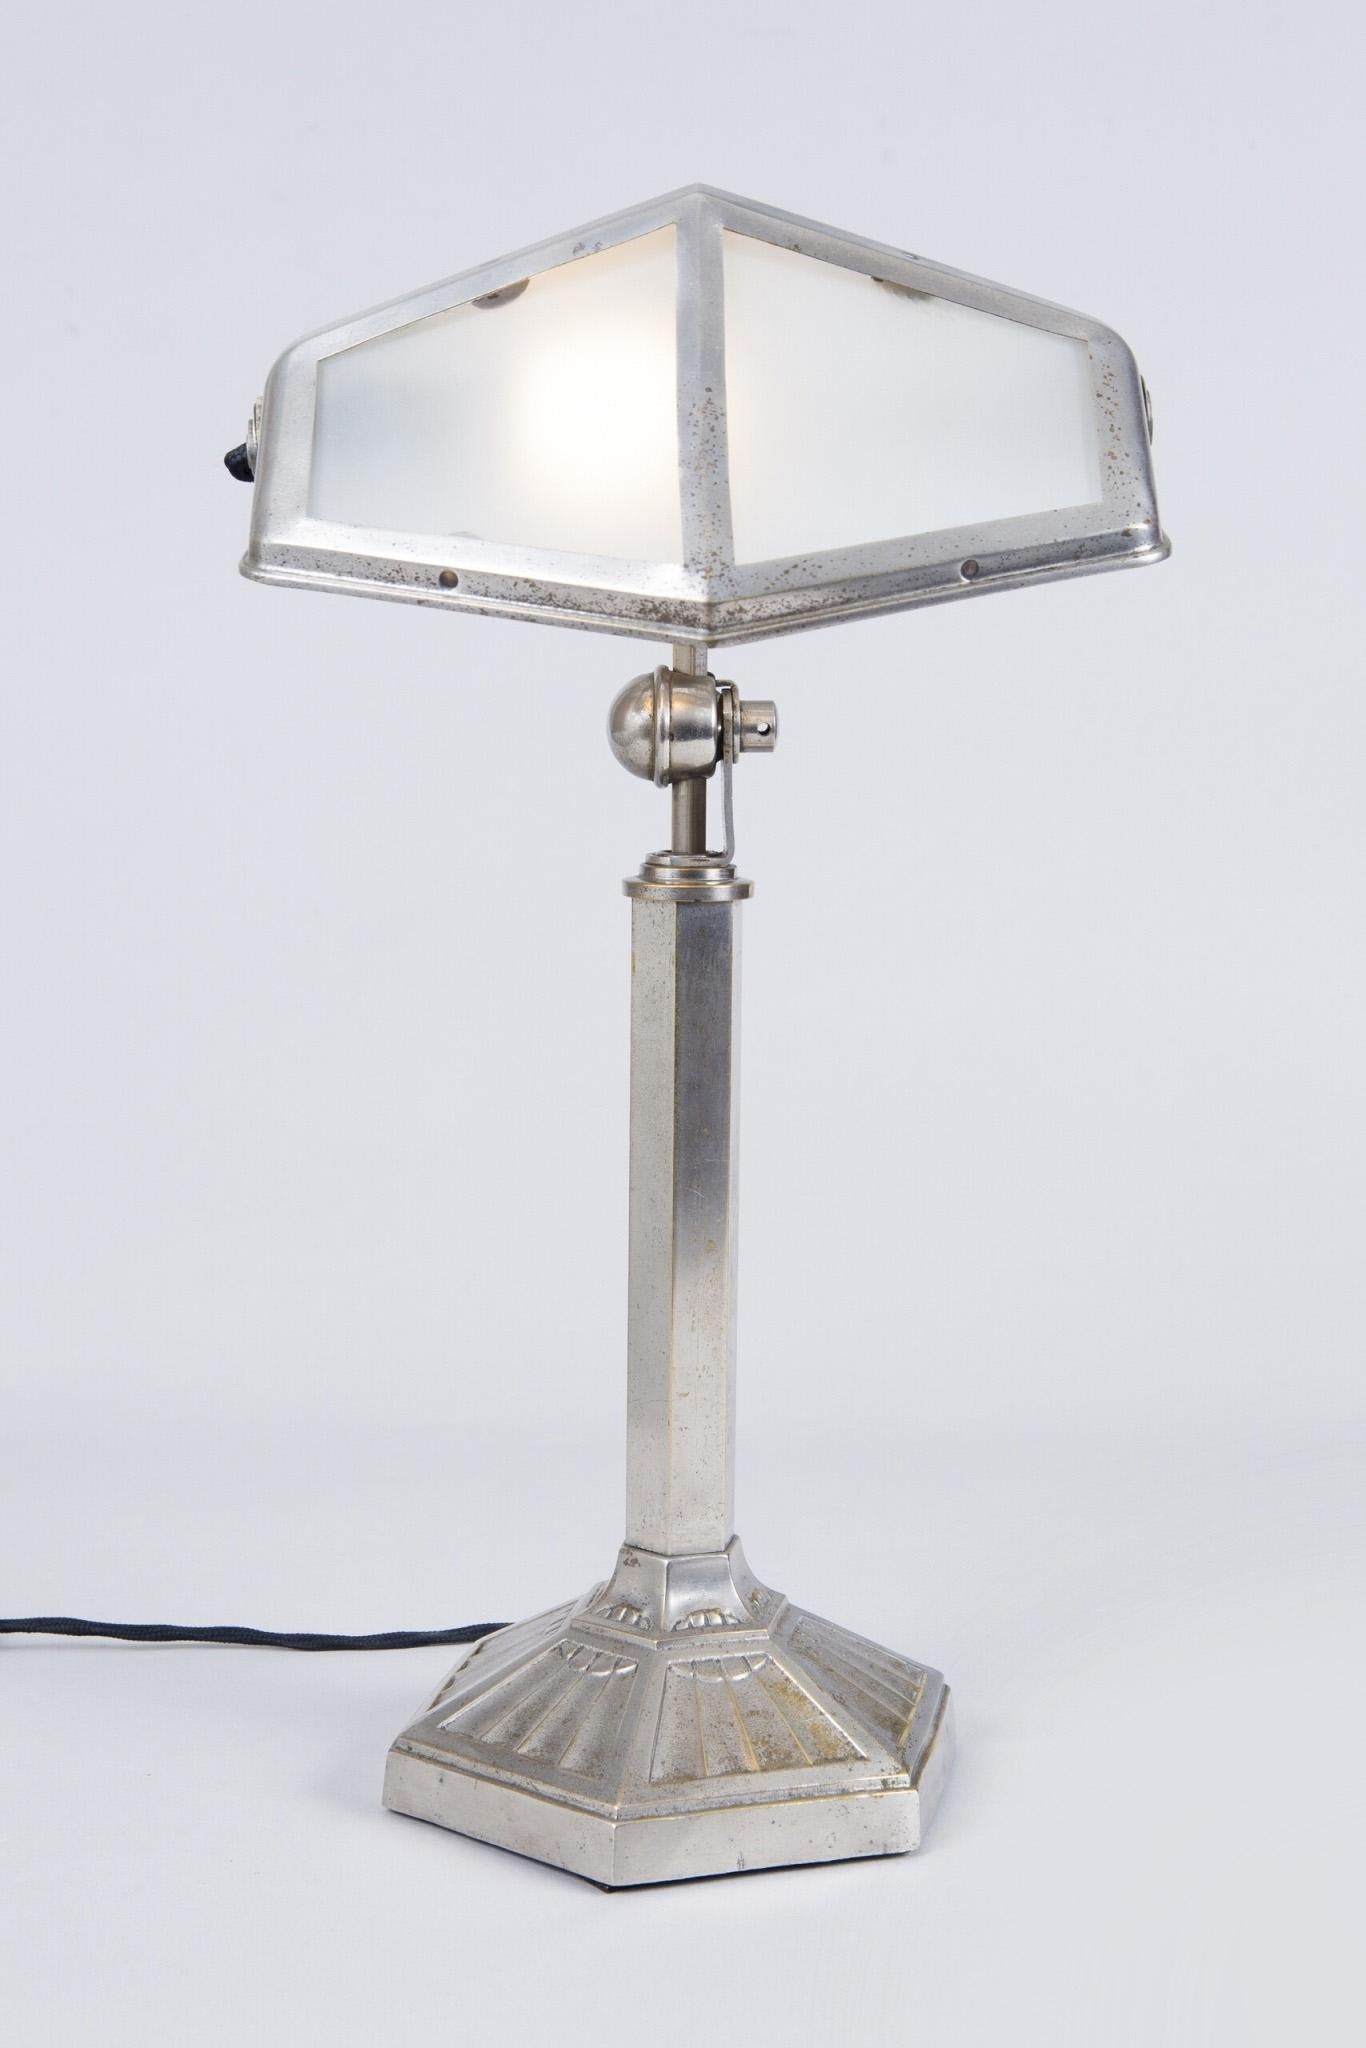 French Art  Deco Adjustable Lamp, Original Condition, 1920s, Nickel and Brass In Good Condition For Sale In Horomerice, CZ